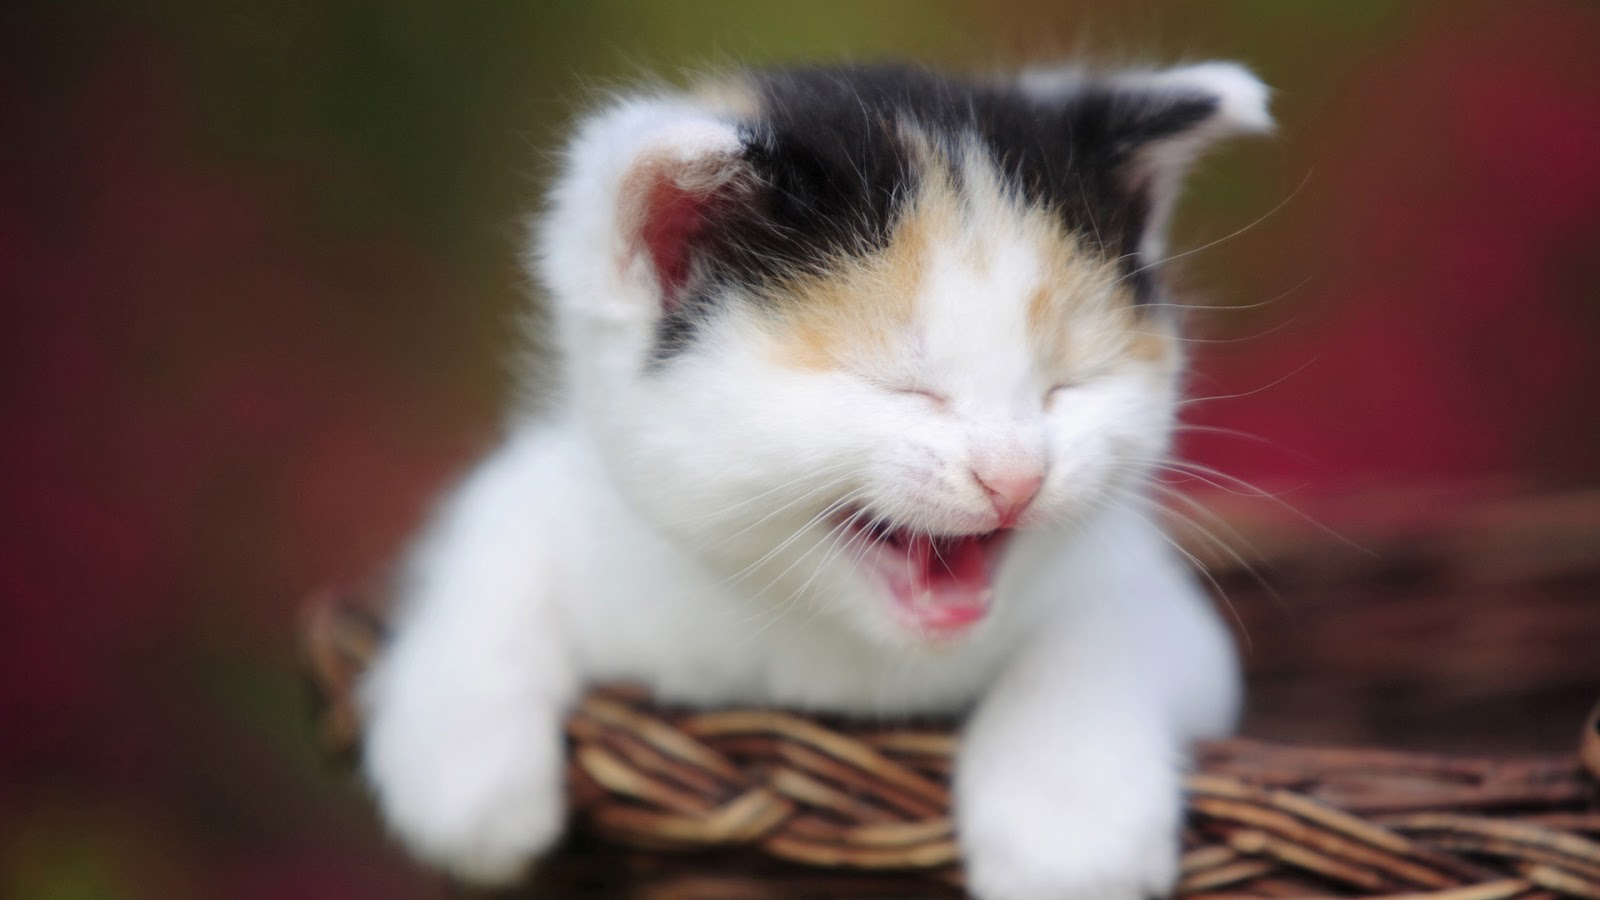 Baby cat crying image